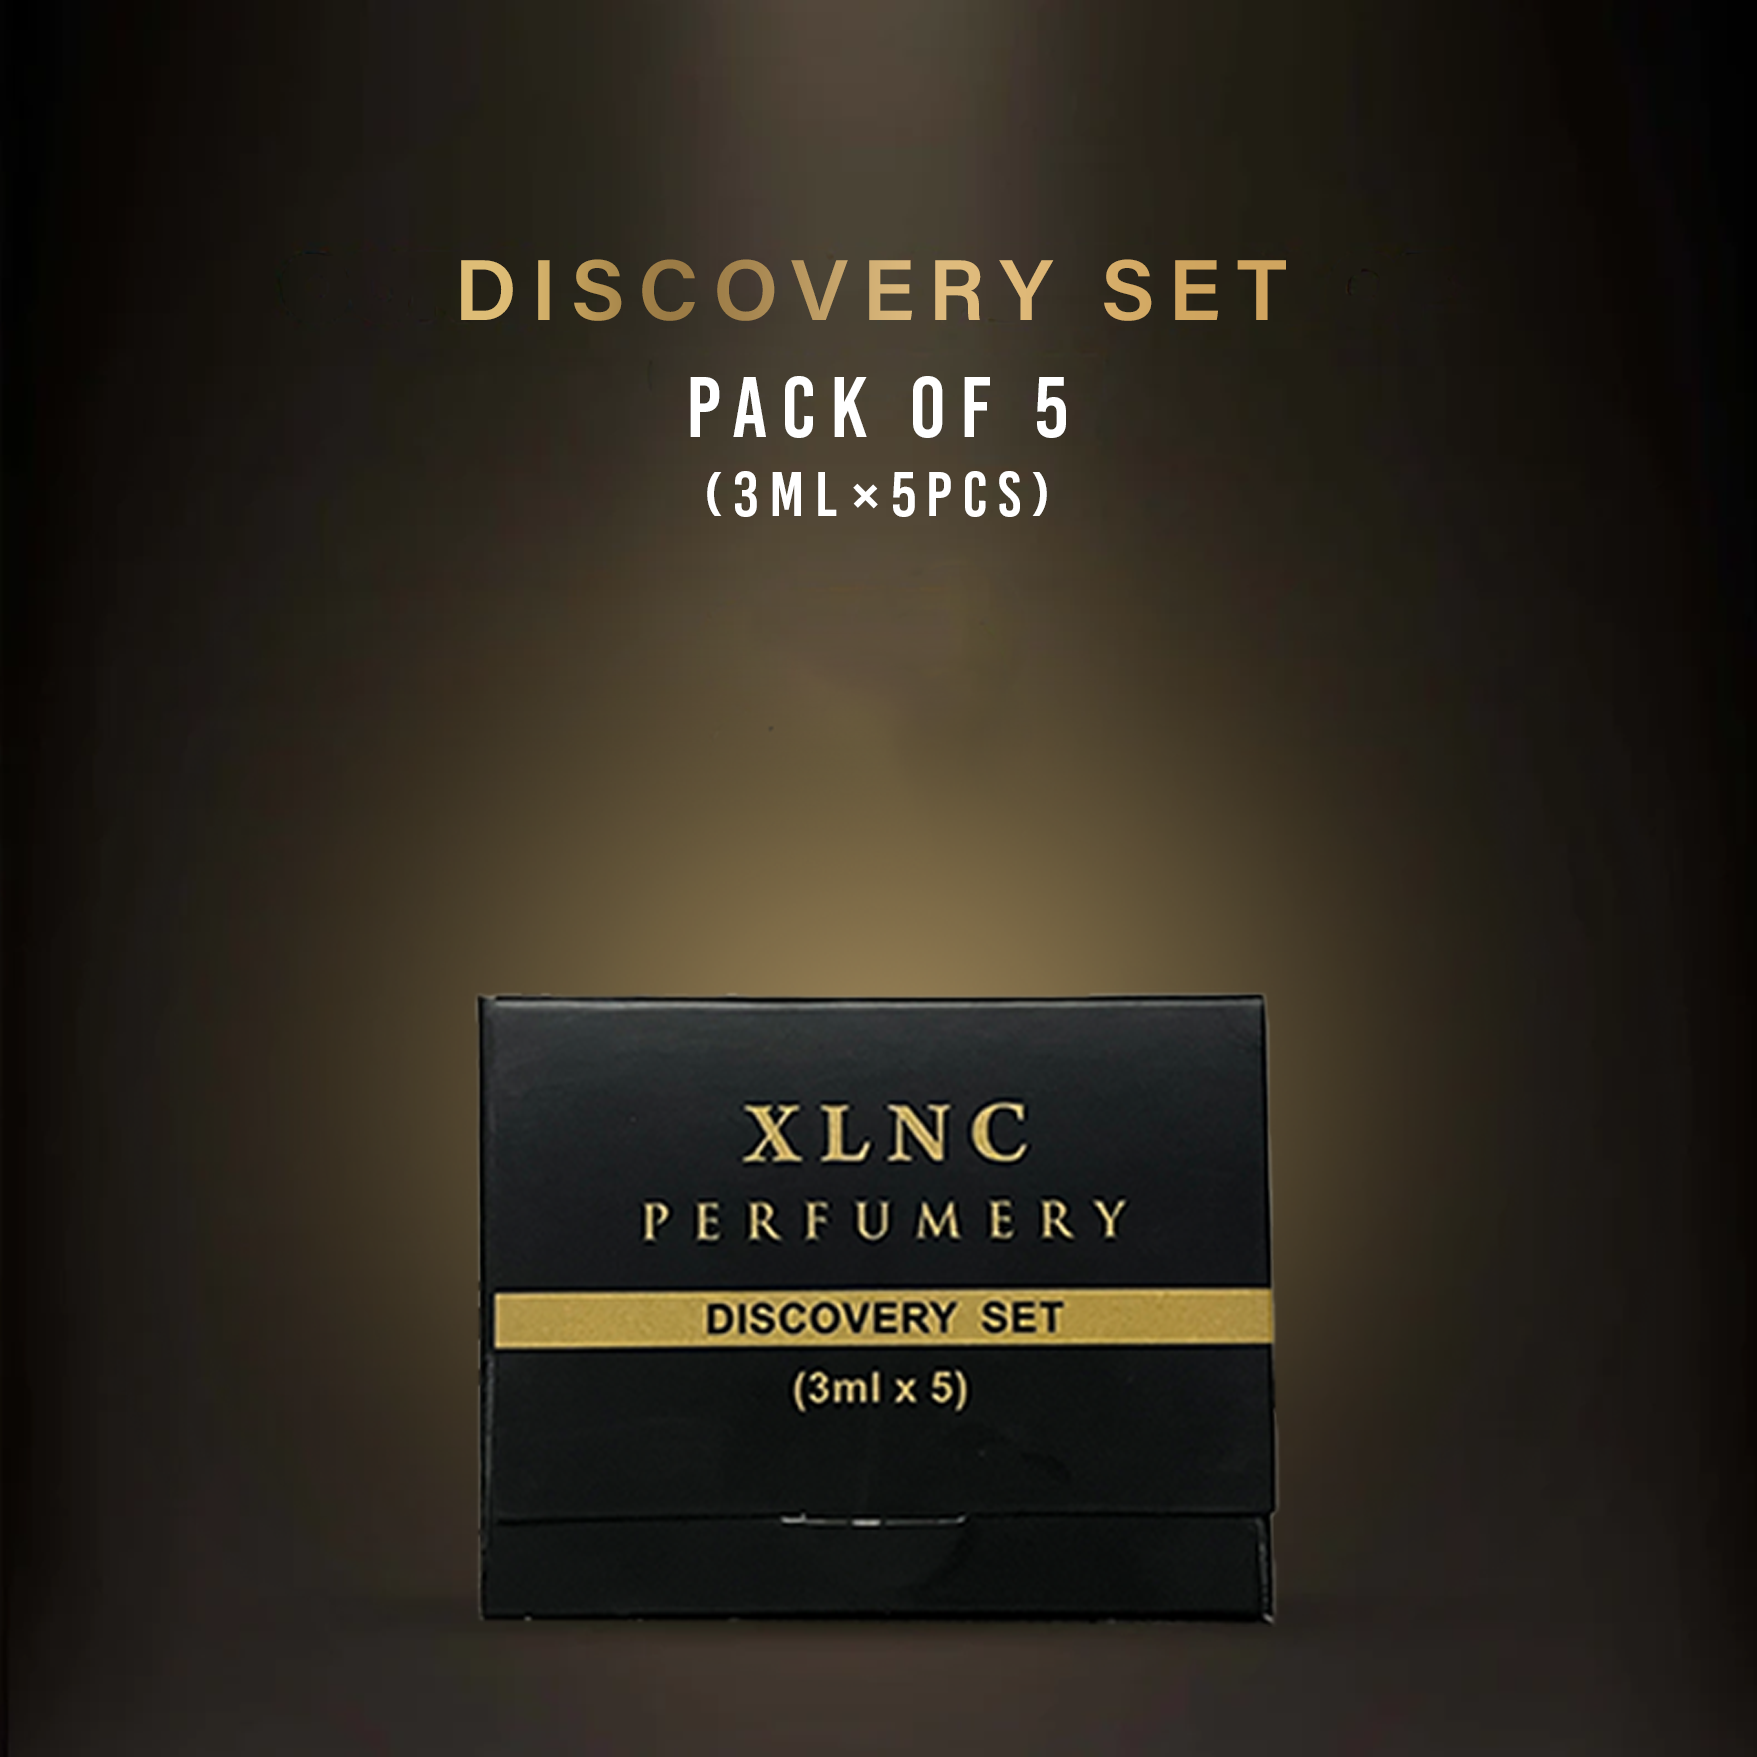 Newly Launched Discovery Set (December)